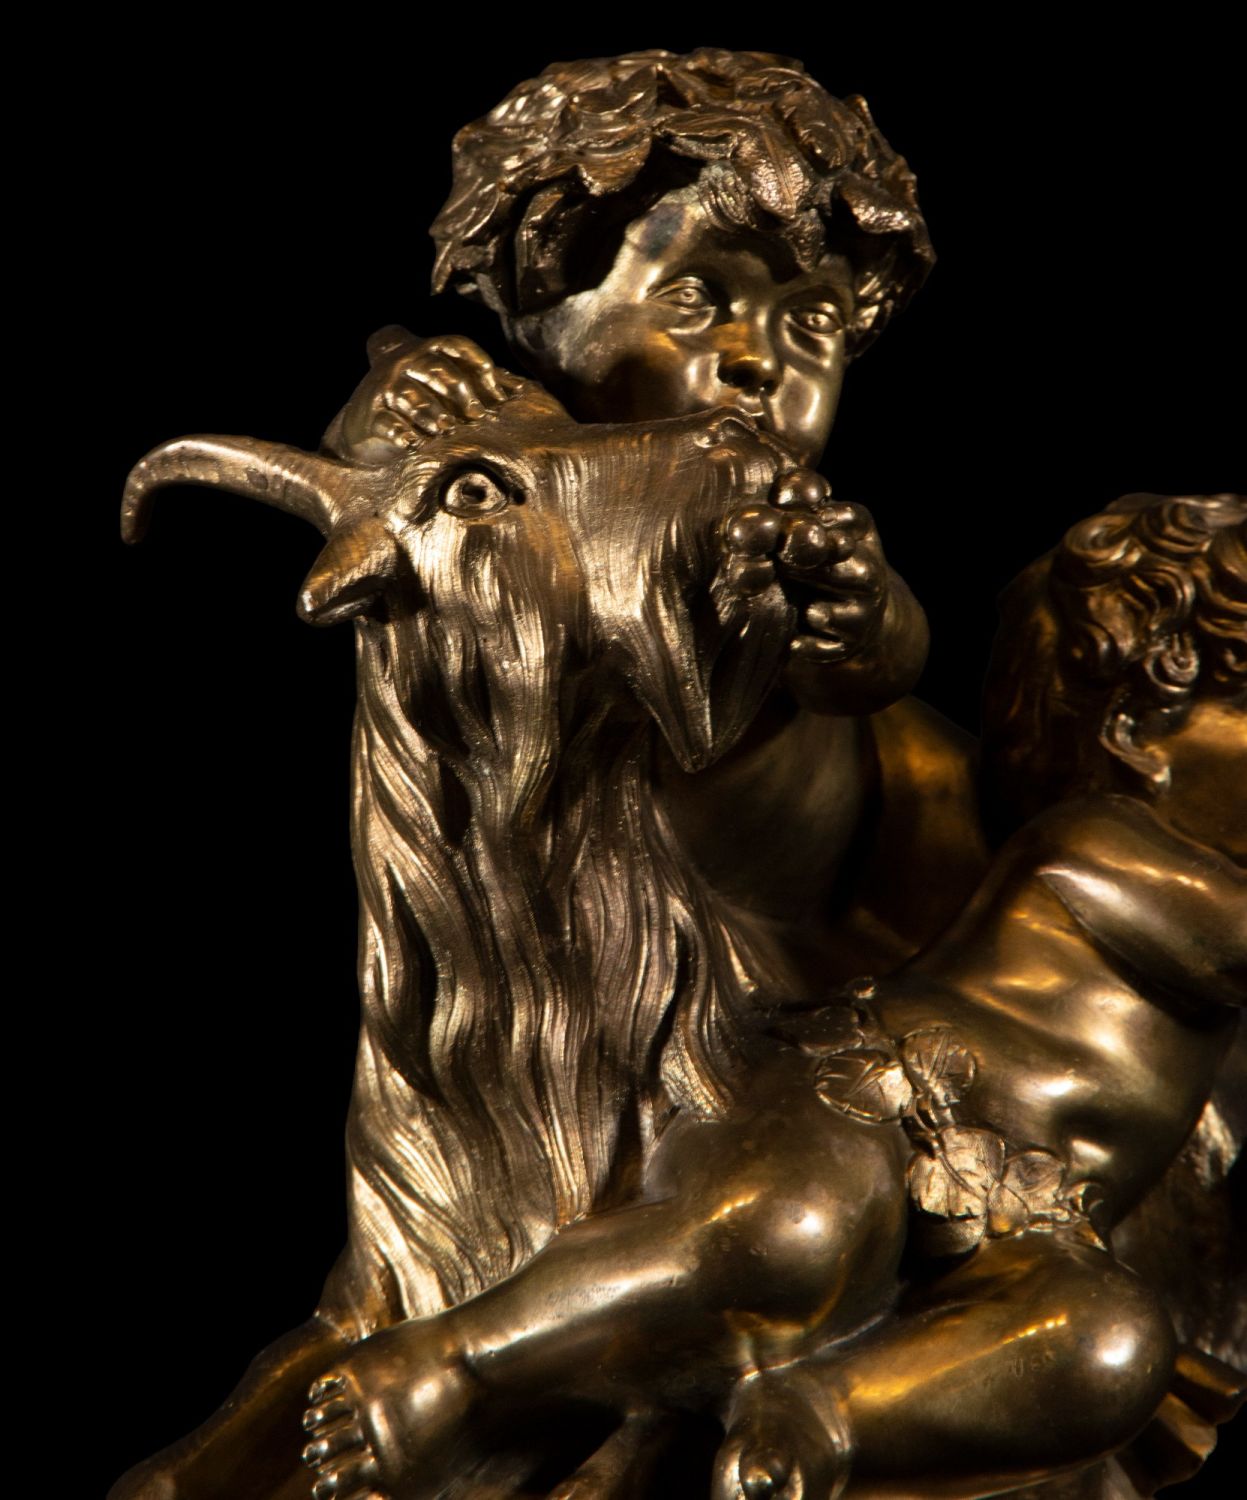 Allegorical French Beaux Arts sculpture of two Amours climbing a goat in patinated and gilded bronze - Image 7 of 8